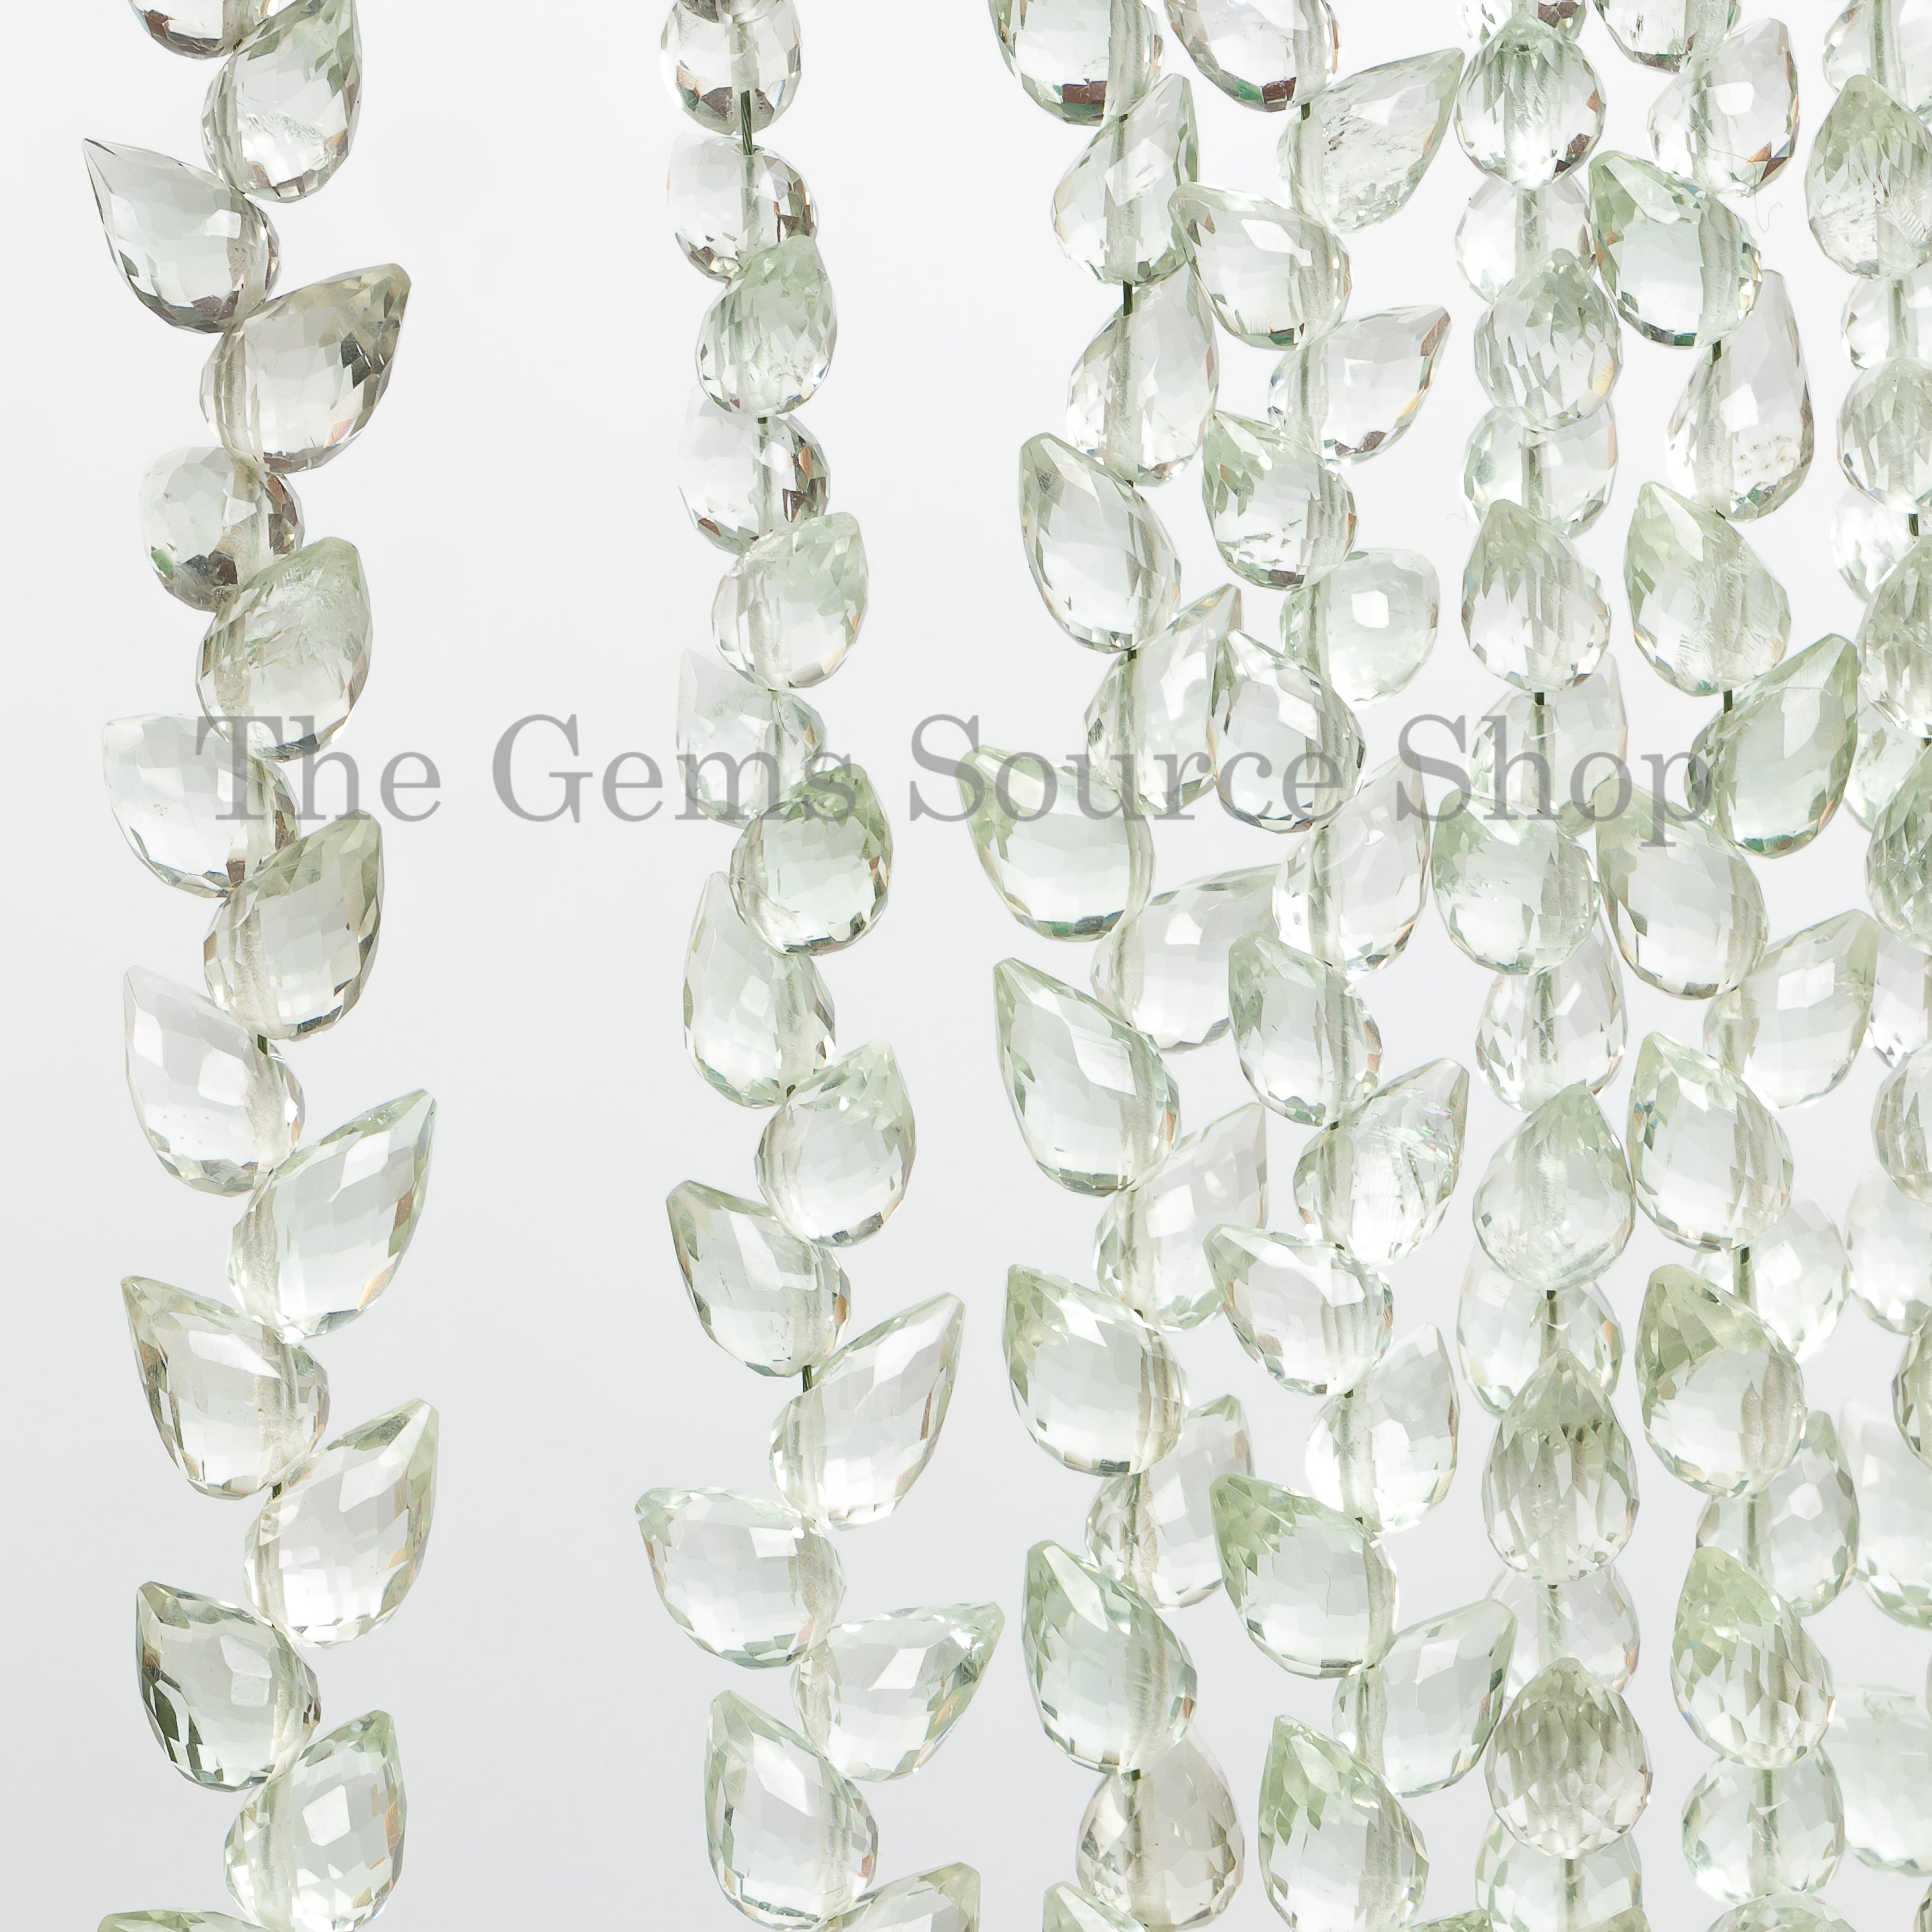 Green amethyst faceted side drill drop beads TGS-4924